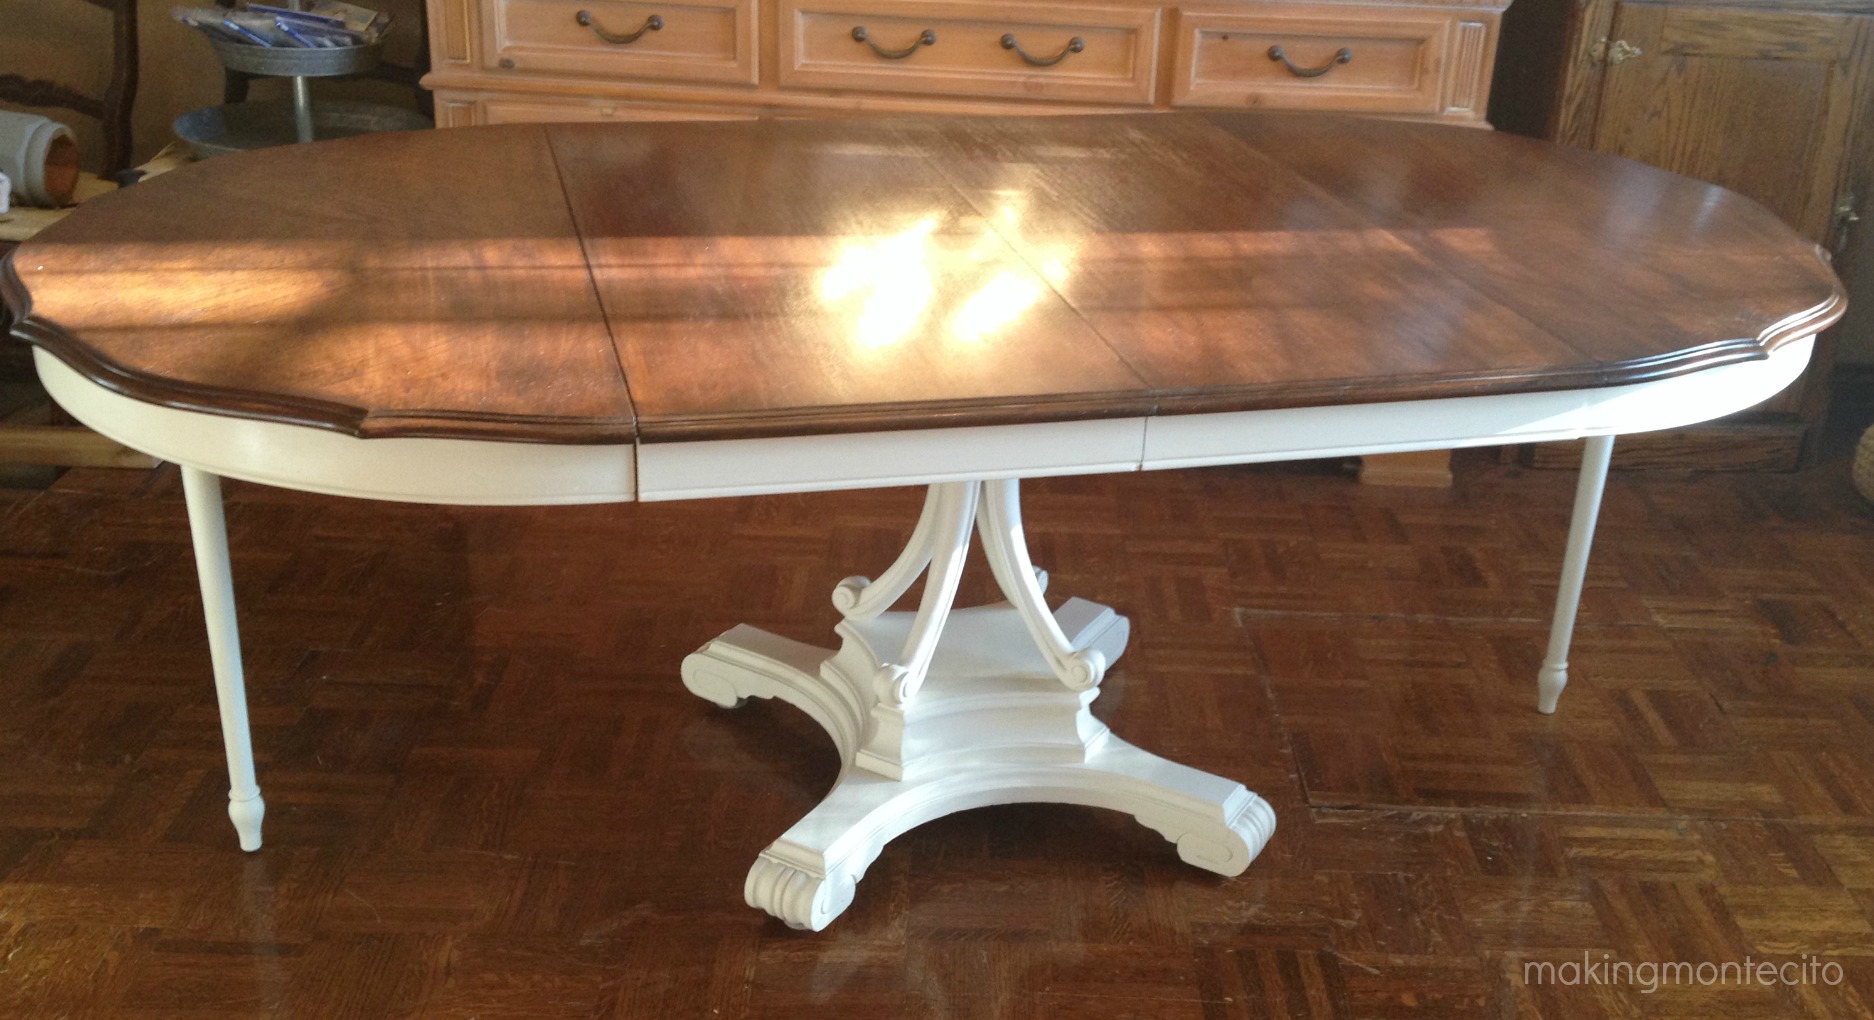 Vintage dining table updated - making montecito 4